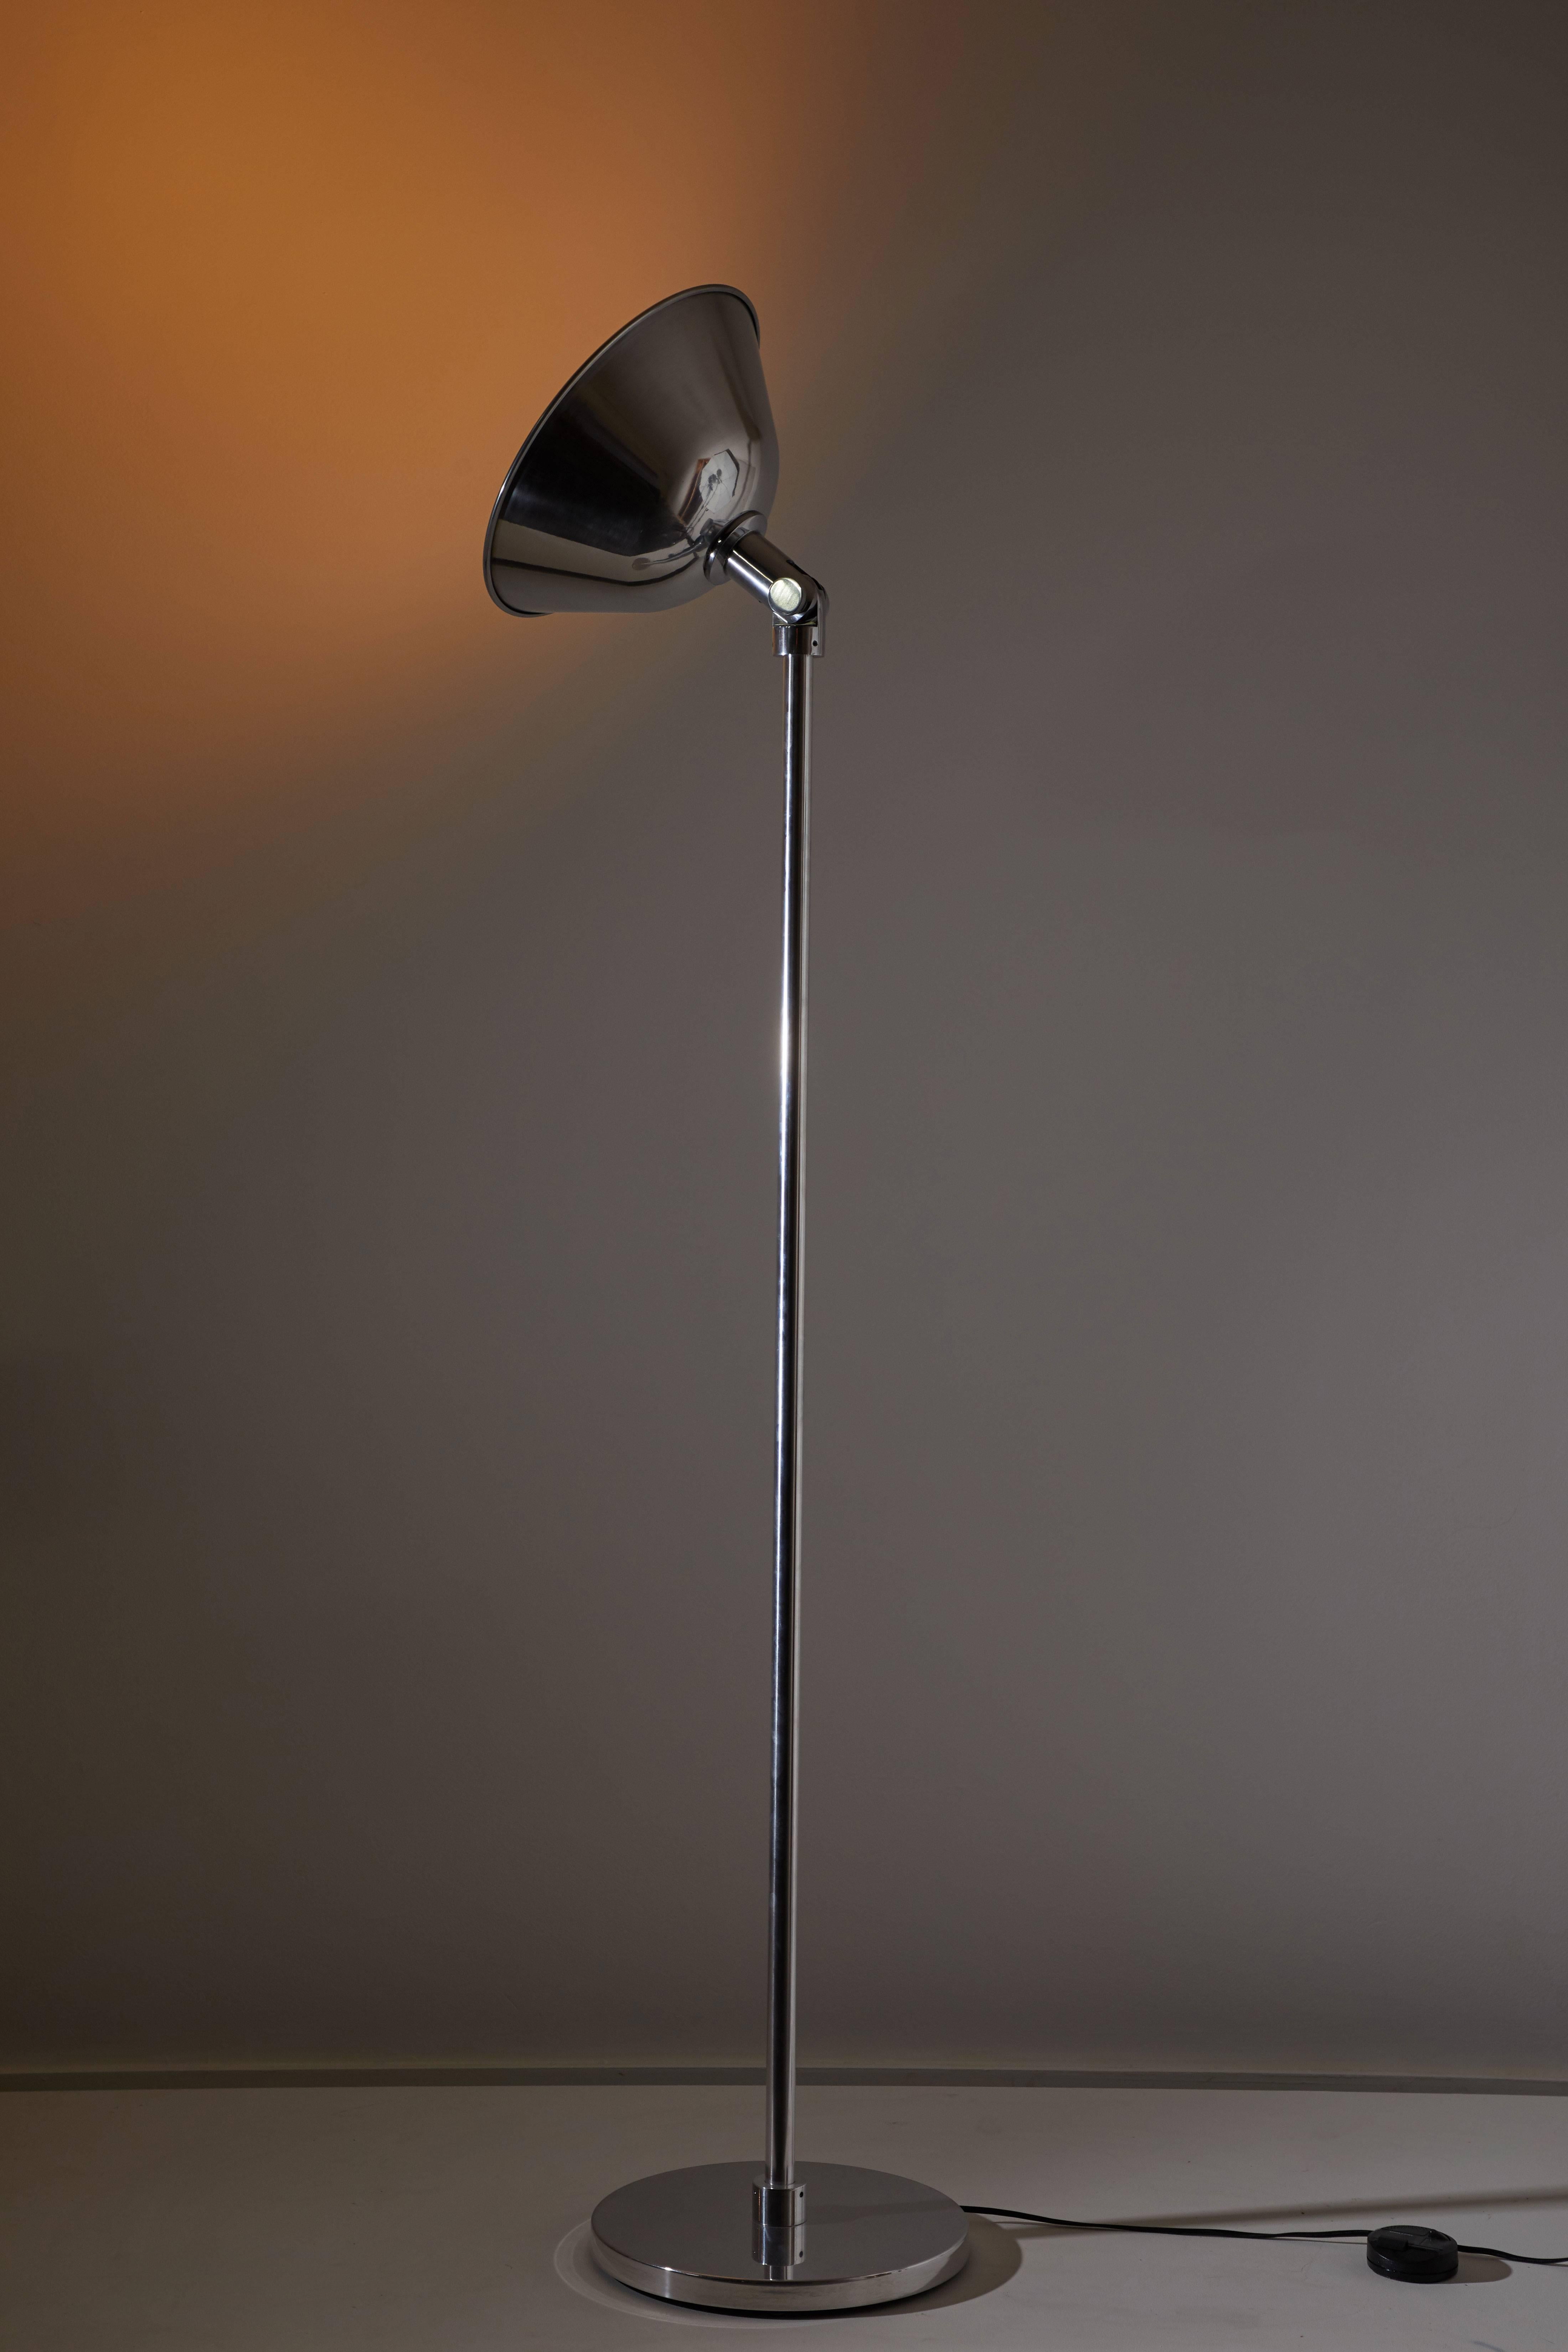 GATCPAC floor lamp by Josep Torres Clavé for Santa & Cole originally designed in 1931. This re-edition floor lamp has a metal base and a tall shaft with a broad cross-section like an unsheathed column. At the top, a joint that can be adjusted by